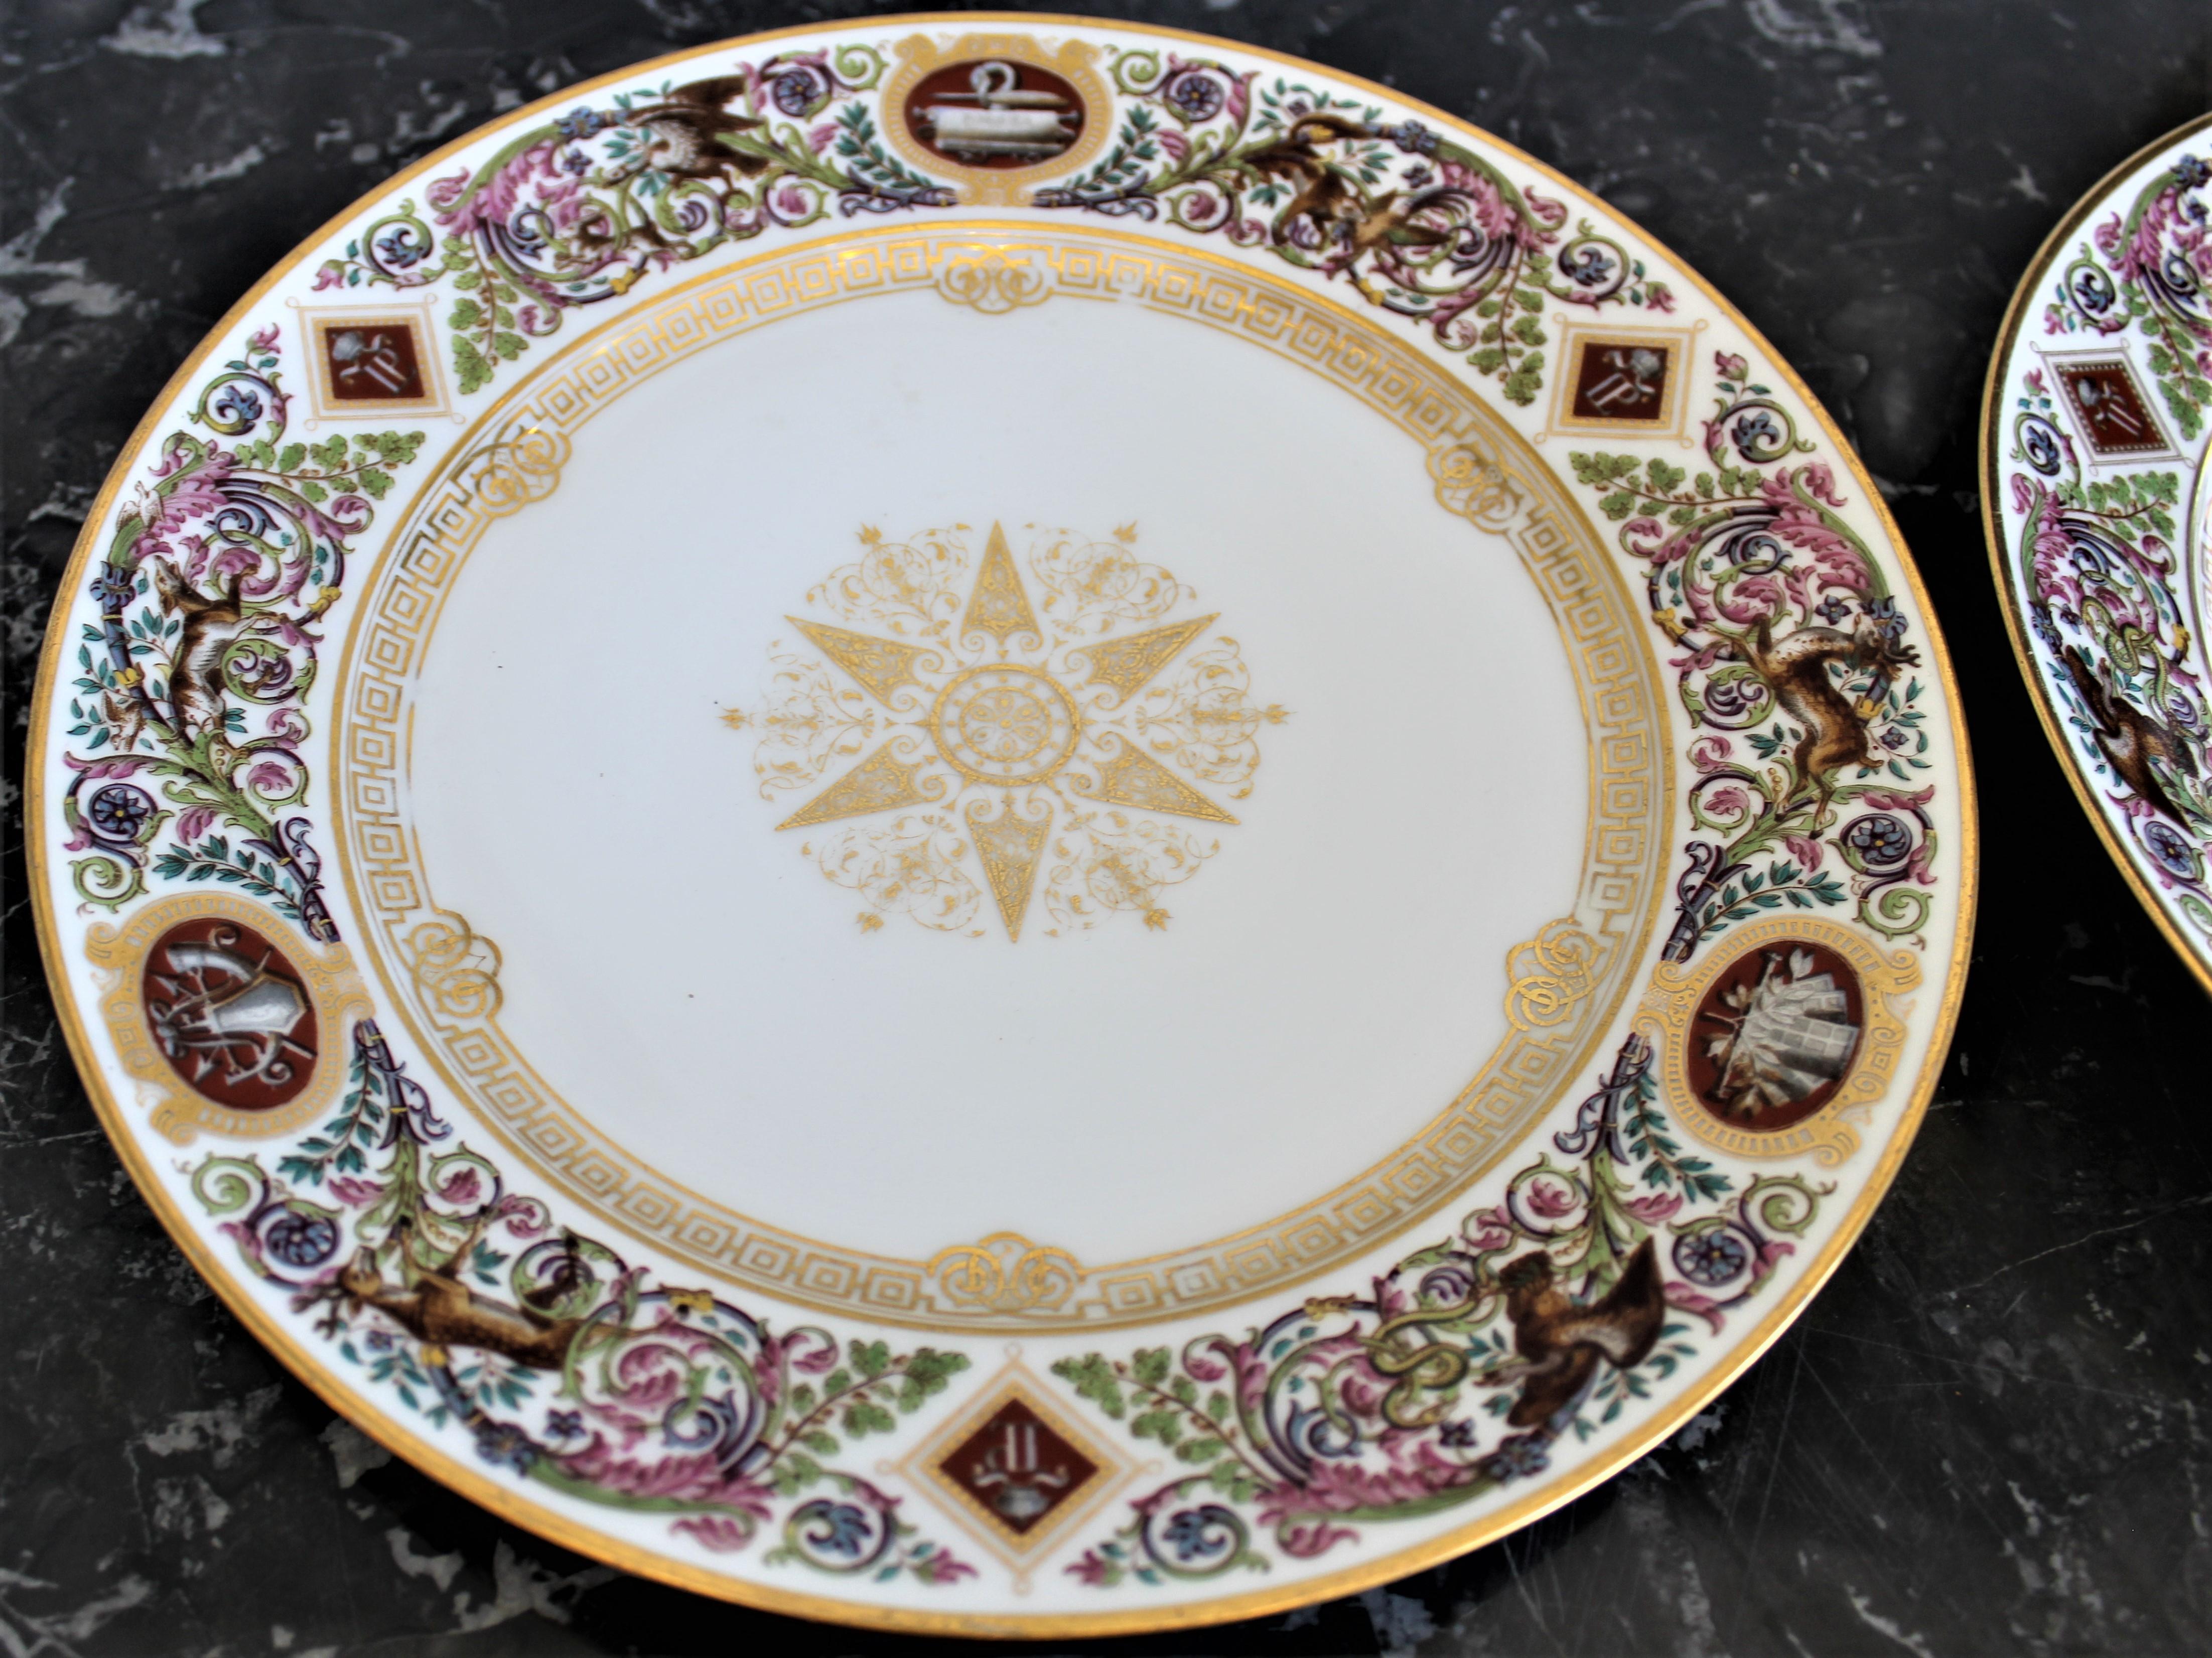  Sevres Chateau de Fountainbleu Pattern French Dinner or Cabinet Plates: 6 9